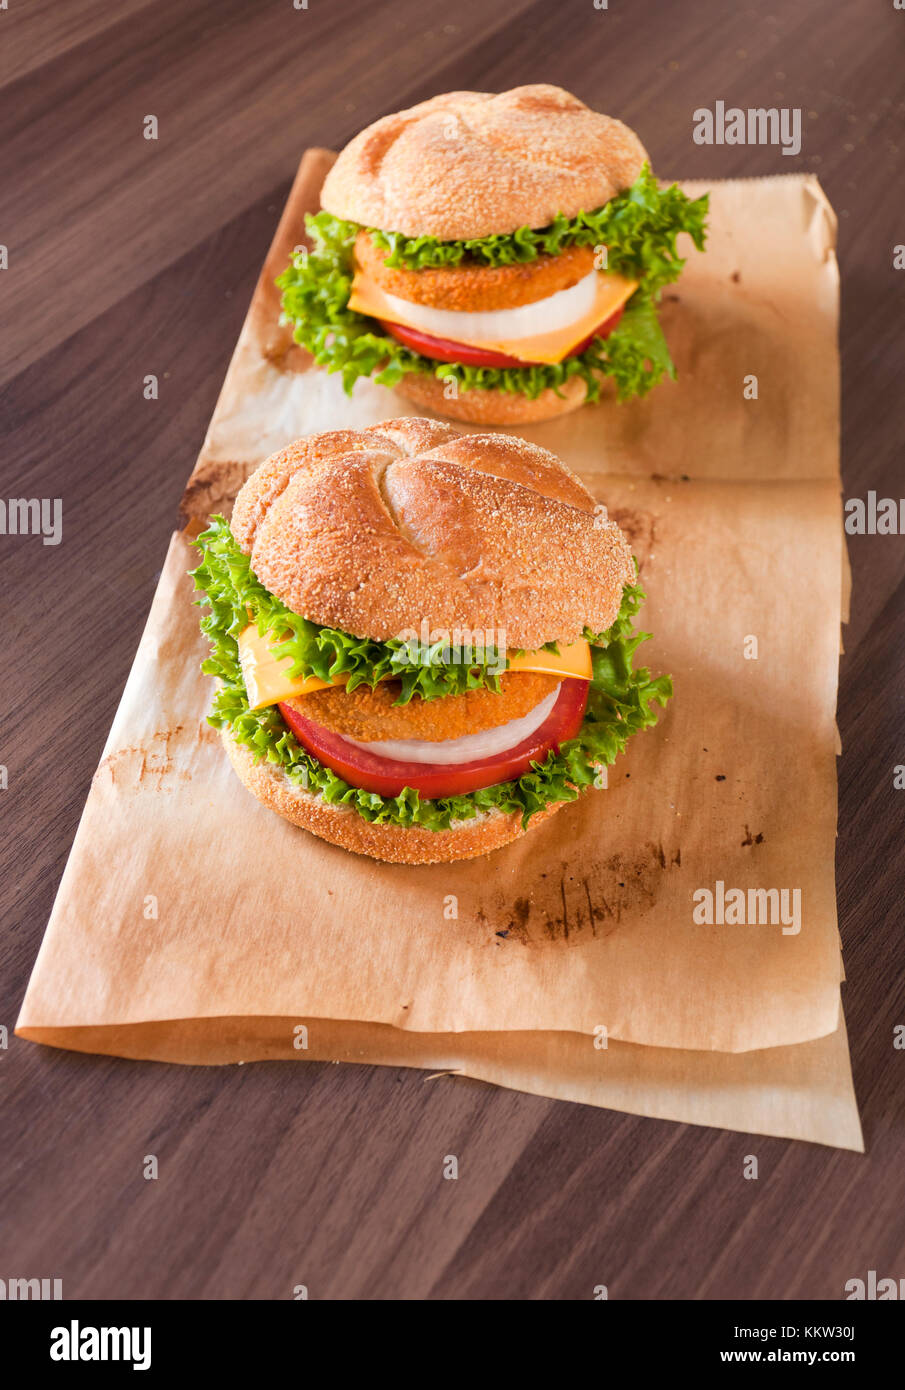 Two fish burgers on the wooden table Stock Photo